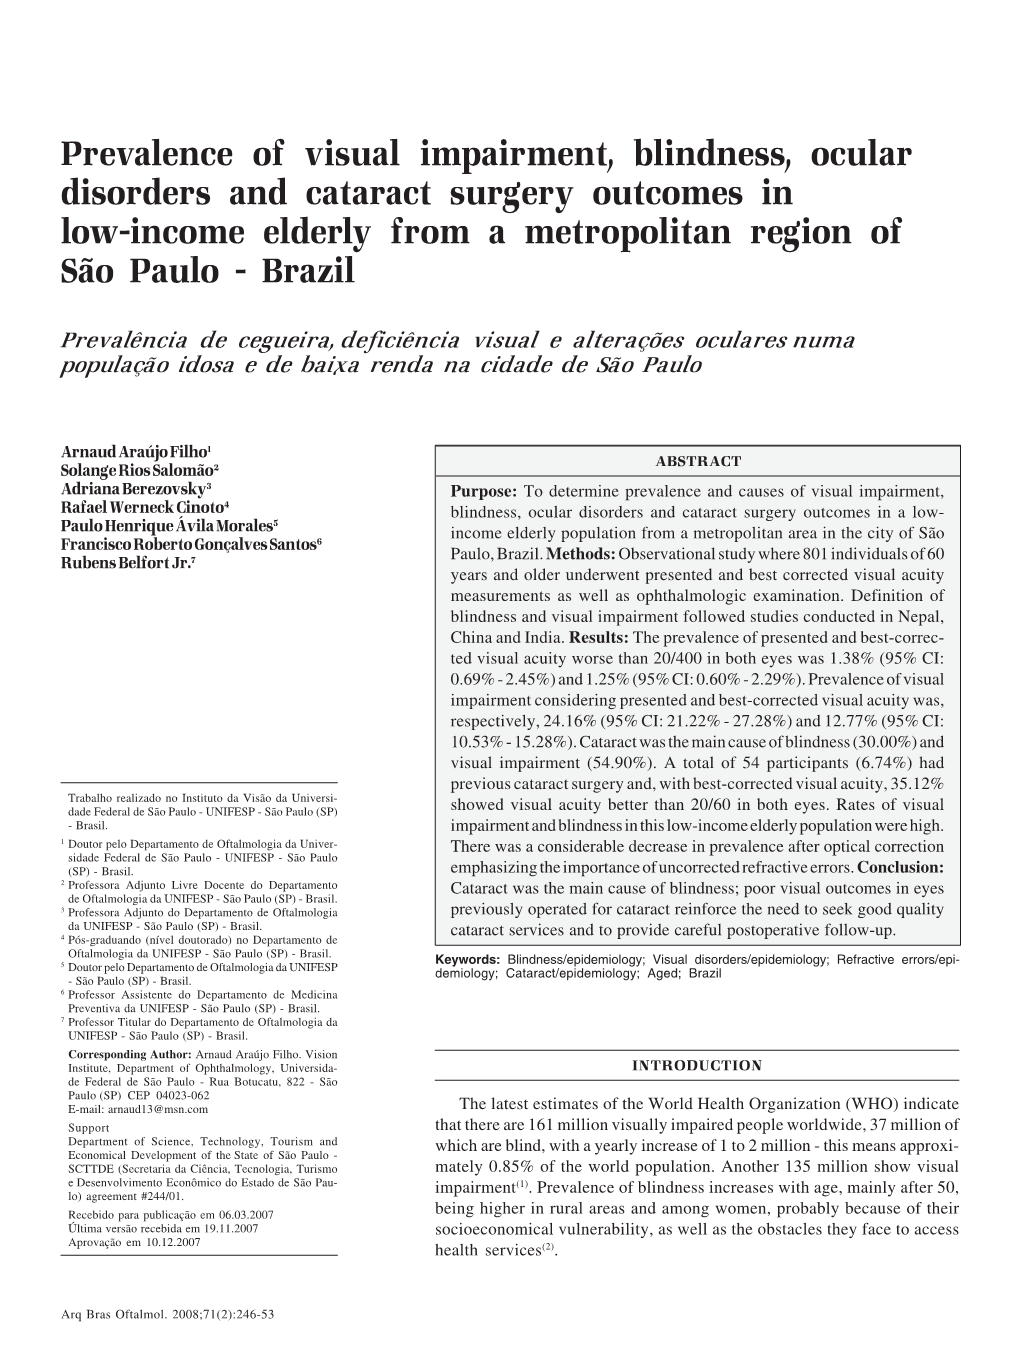 Prevalence of Visual Impairment, Blindness, Ocular Disorders and Cataract Surgery Outcomes in Low-Income Elderly from a Metropolitan Region of São Paulo - Brazil